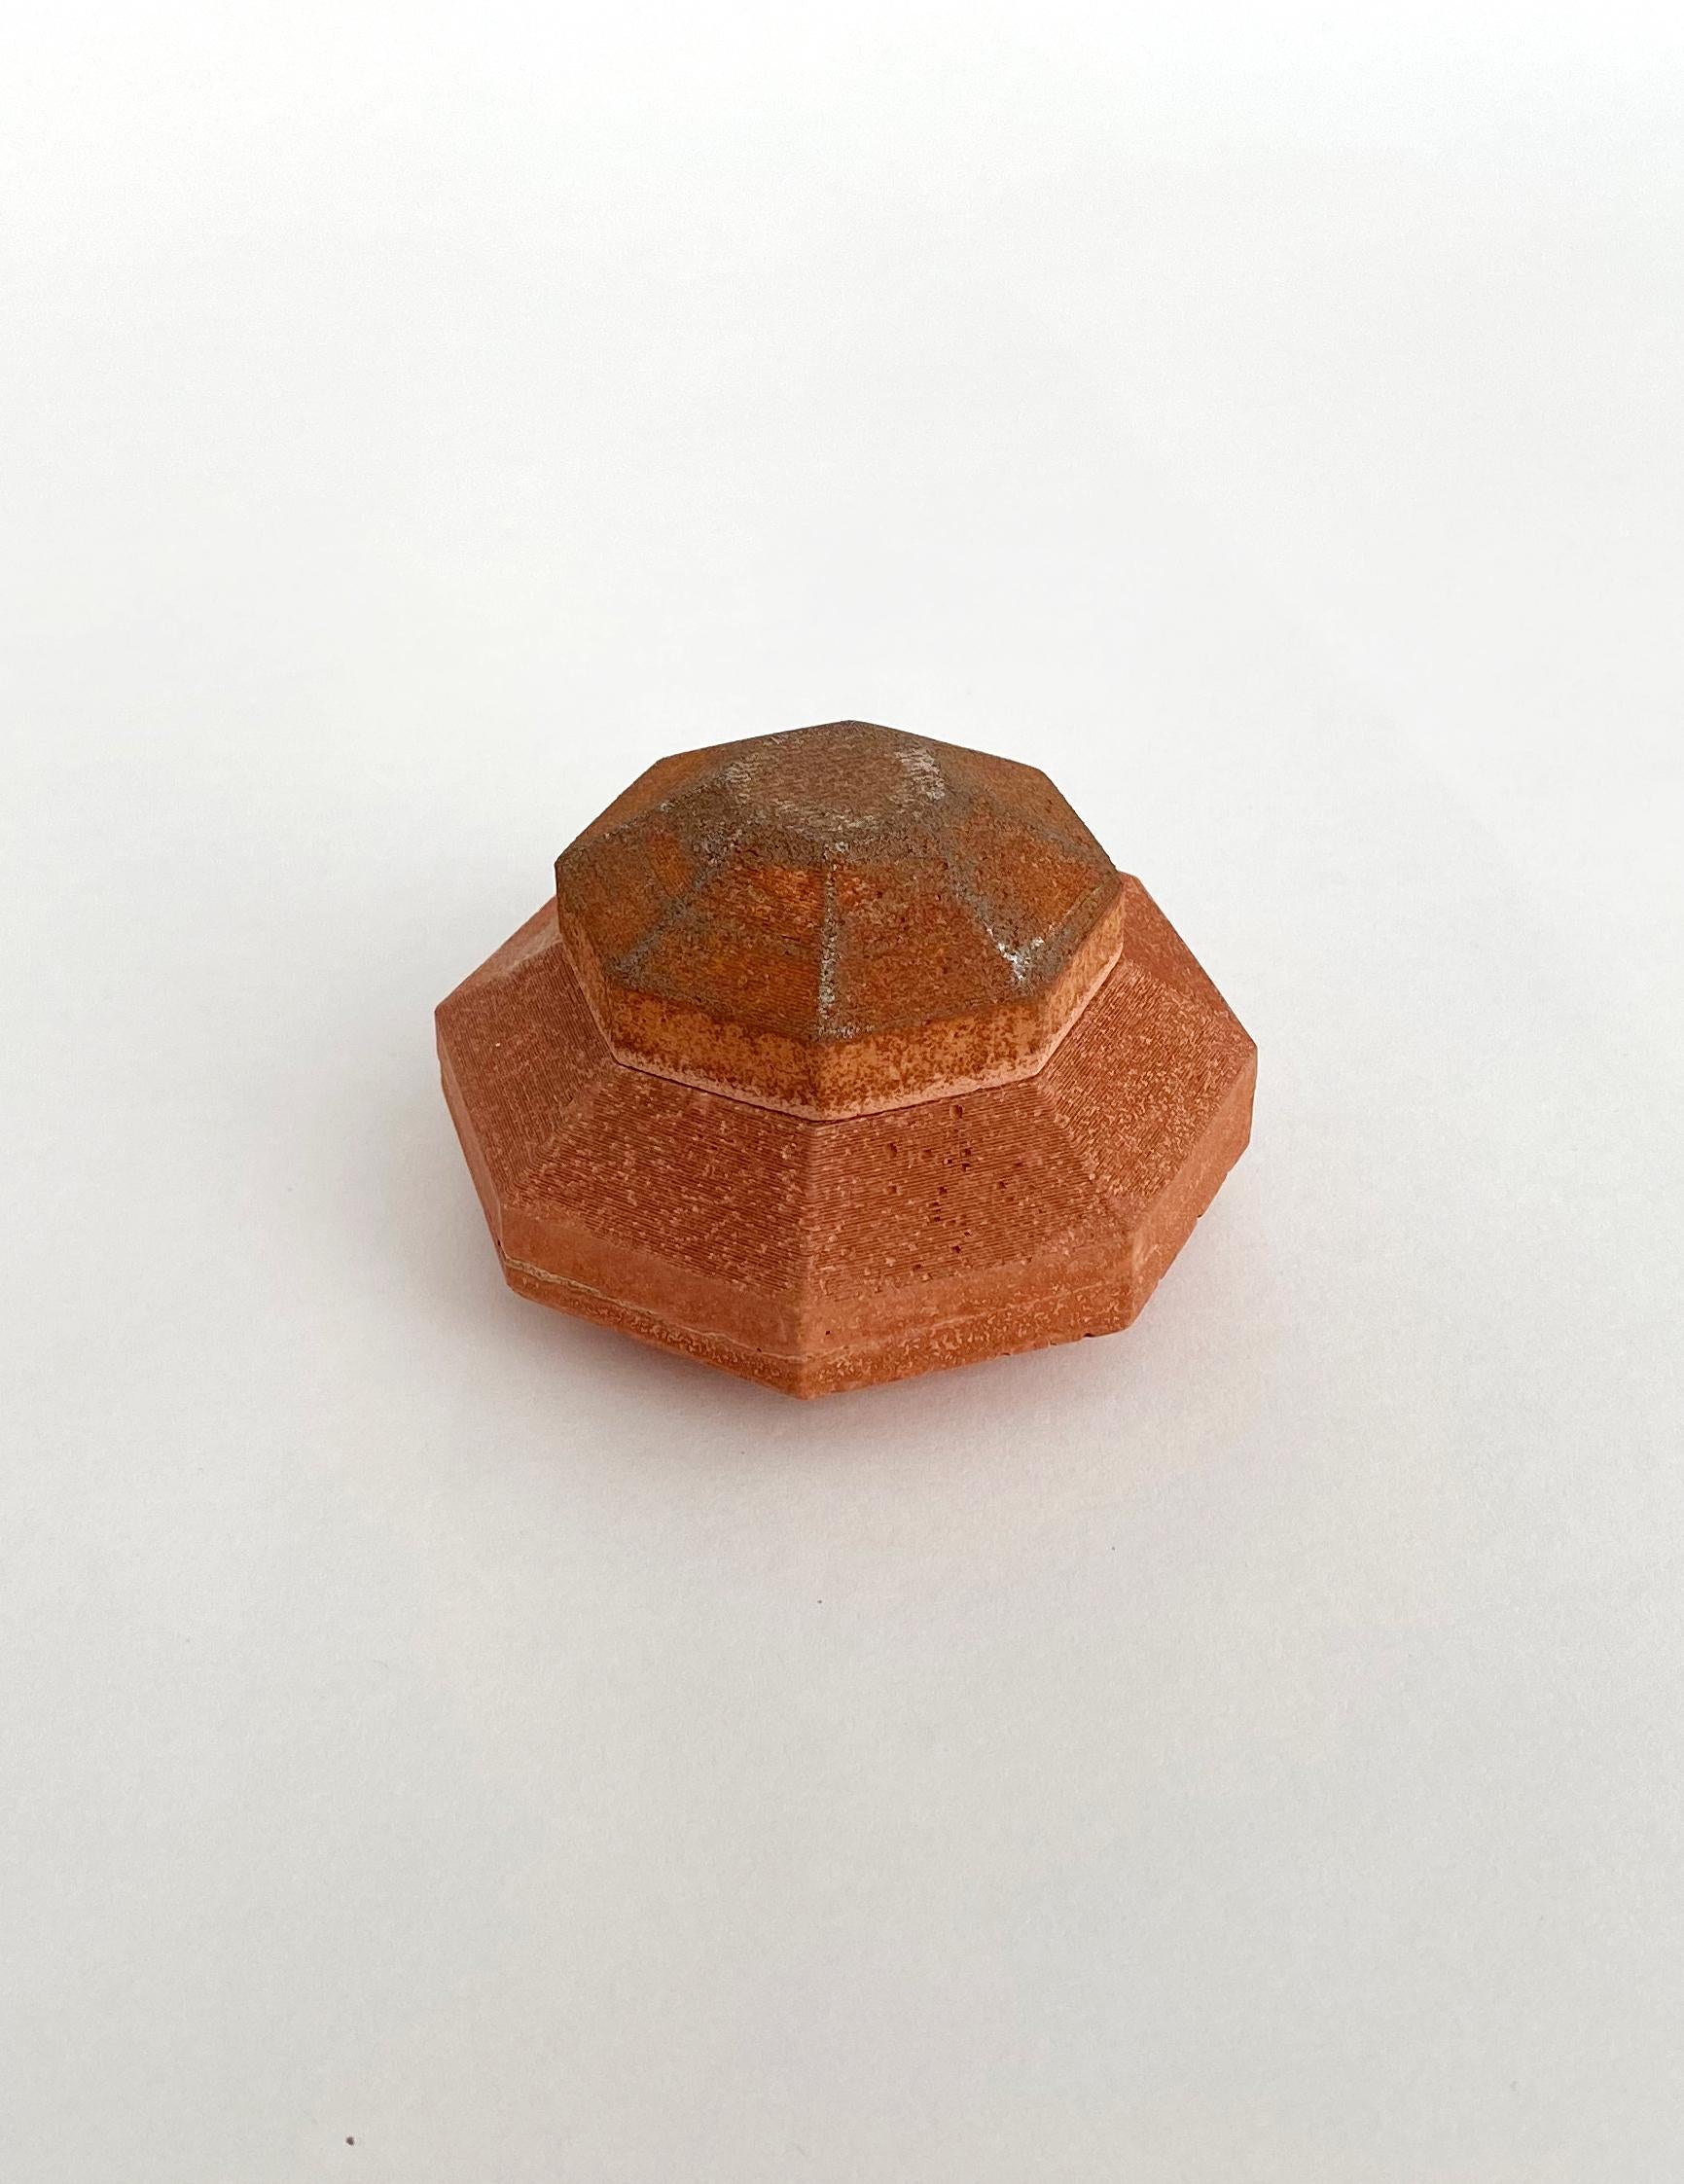 Nomad Jar Disco by Gilles & Cecilie
Unique
Dimensions: H 4,5 x W 7,5 cm
Material: terracotta with iron

Gilles and Cecilie Studio created the Nomad Jar Family to explore drawing in three dimensions. The series of objects that can stand alone or